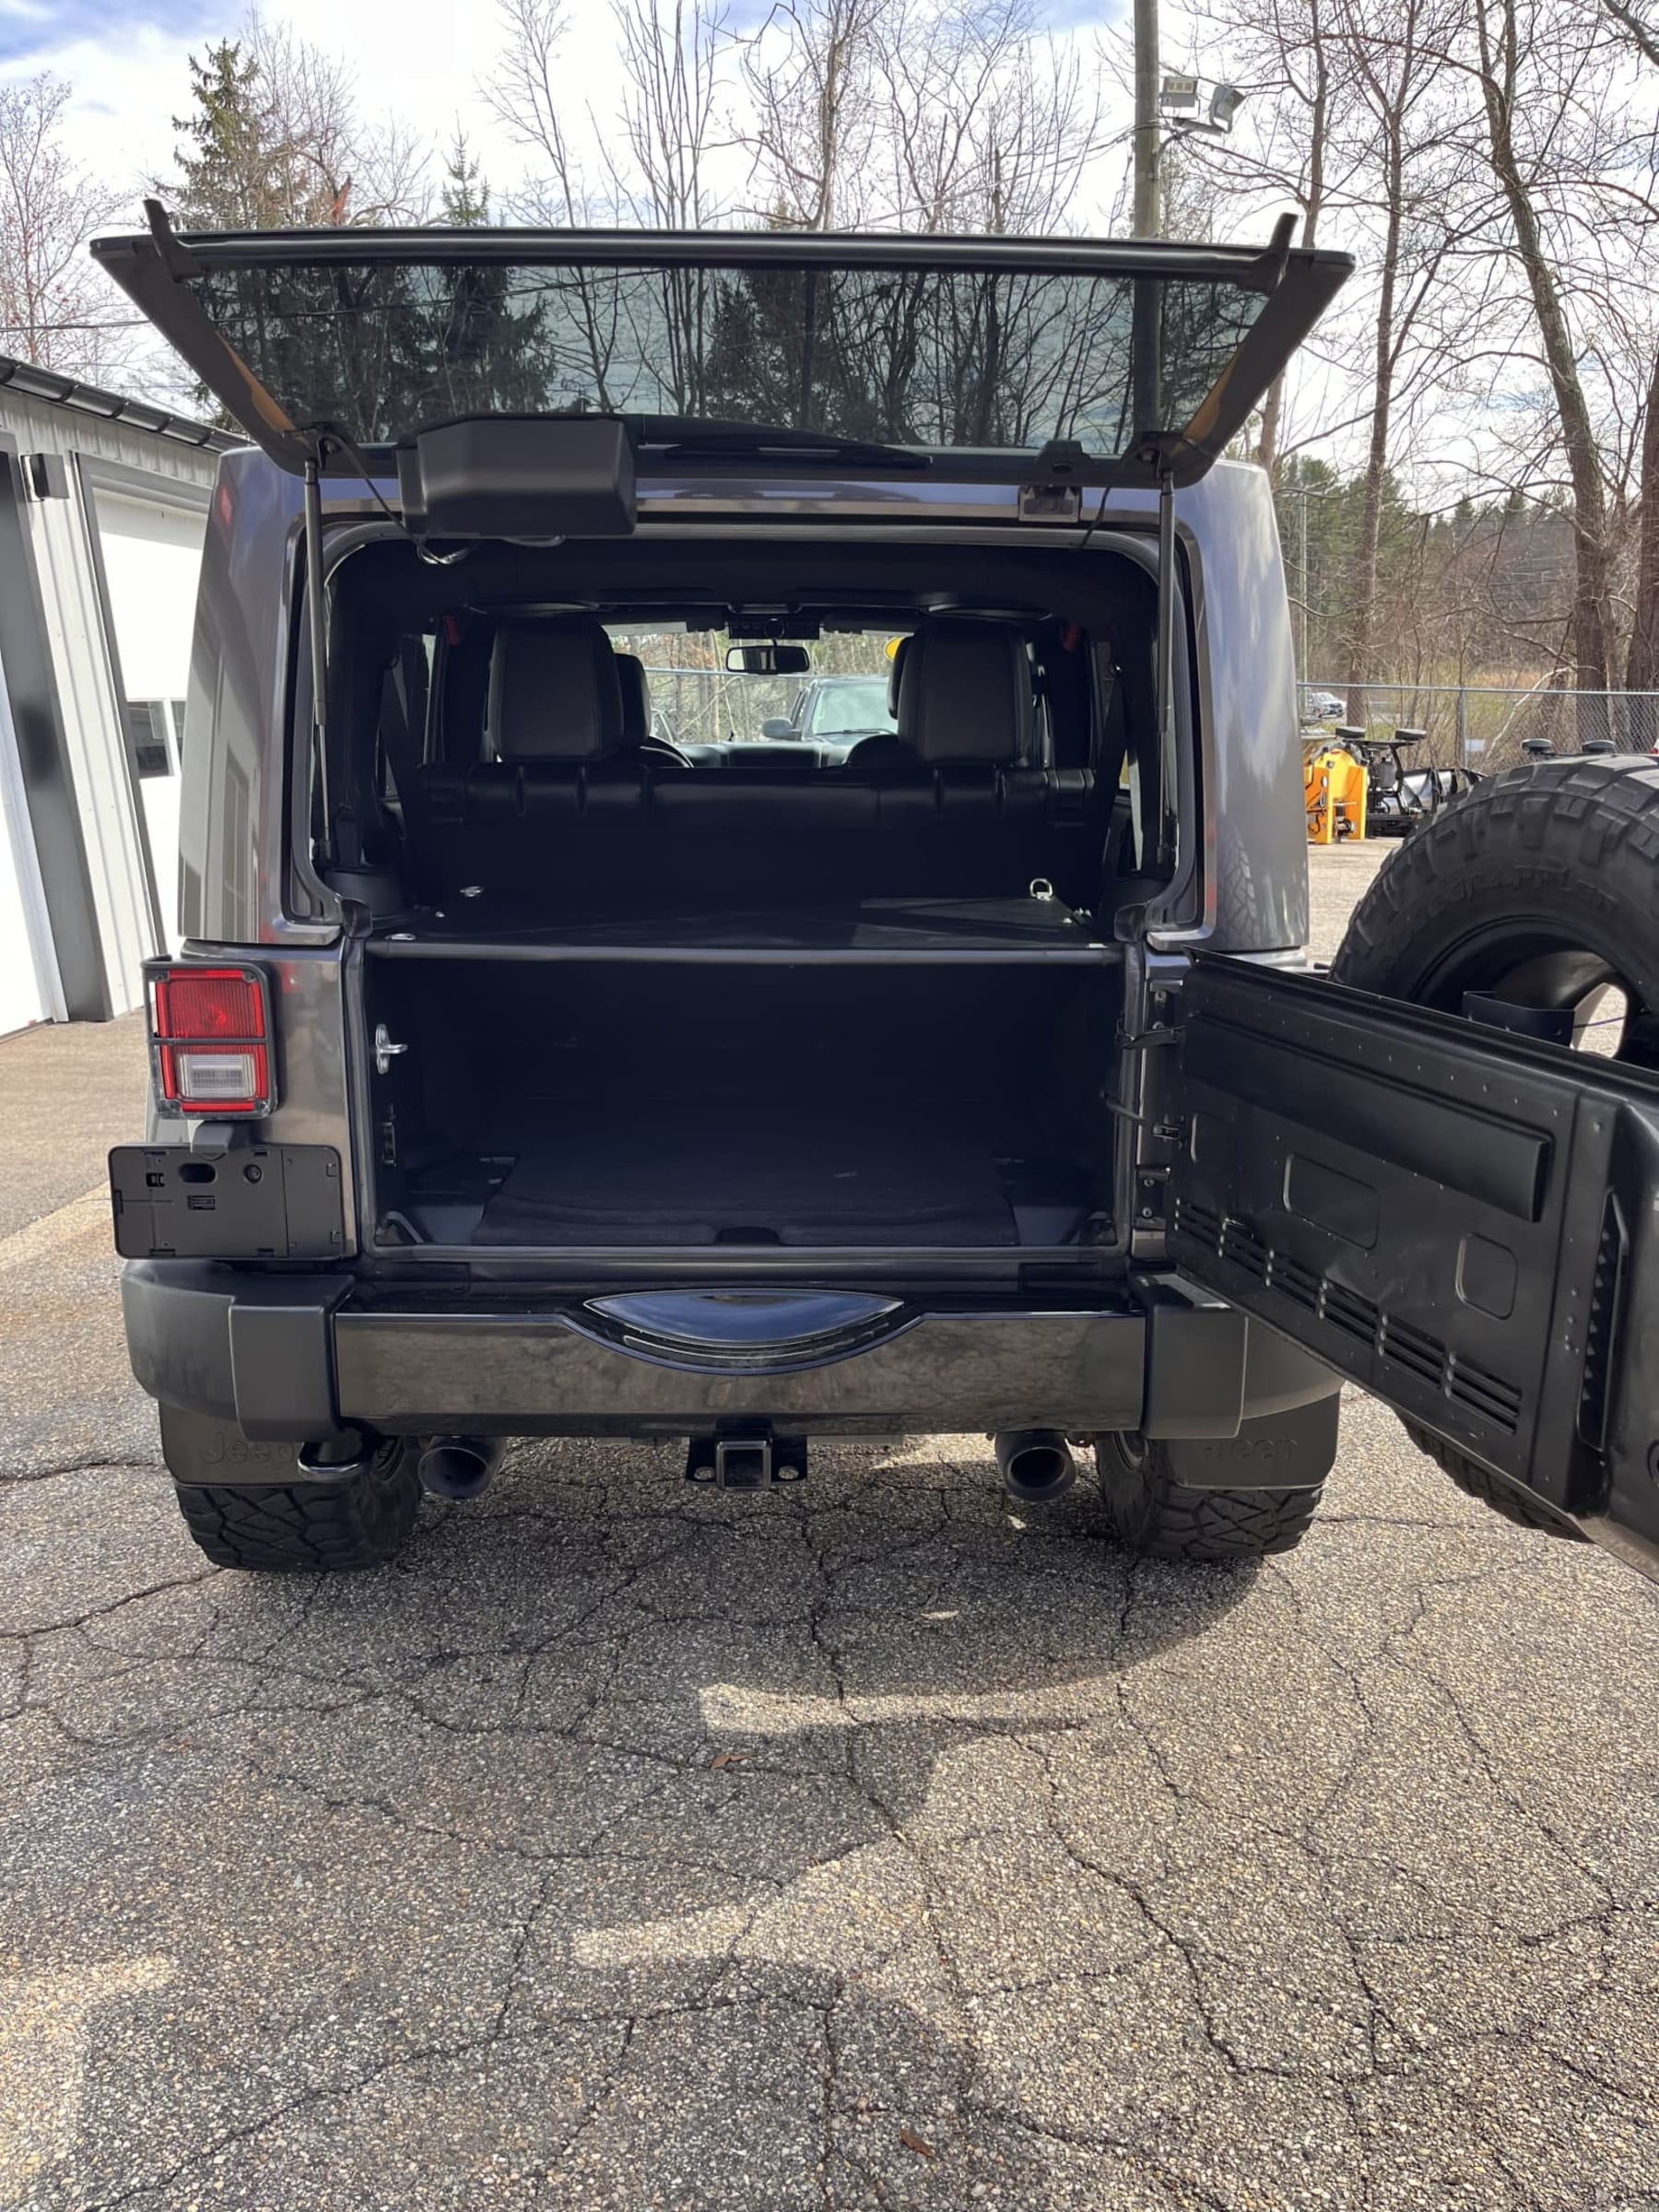 NEW ARRIVAL!! 2018 Jeep Unlimited Altitude!! Clean car fax! ONLY 43,800 miles!! Heated leather seats, lift, wheels and tires, backup camera, body color matching hard top, remote start and many extras!! Looks and runs great! Won’t last at $29,900!!